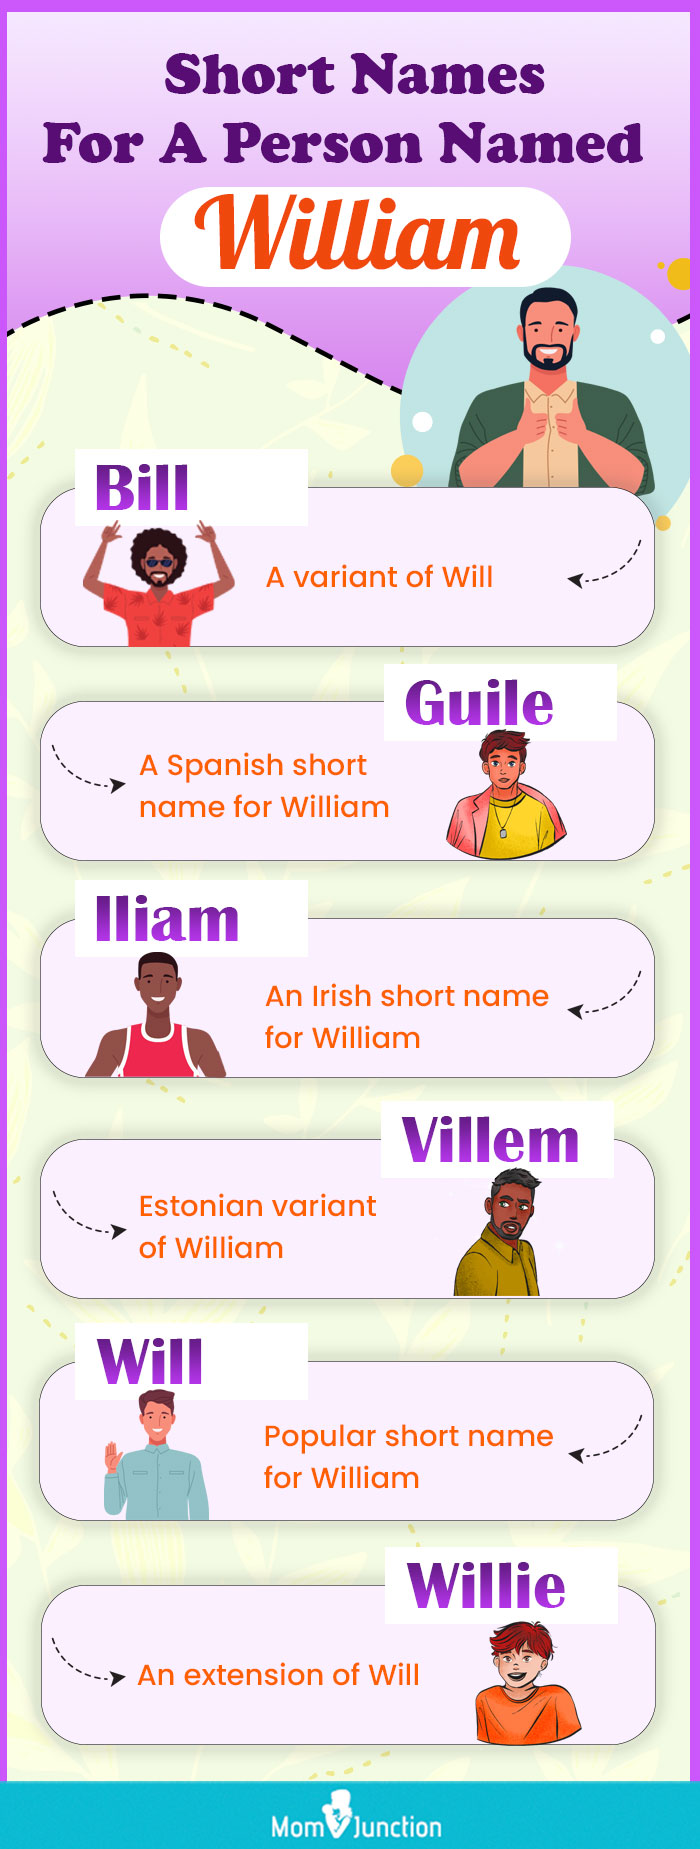 short names for a person named william [infographic]